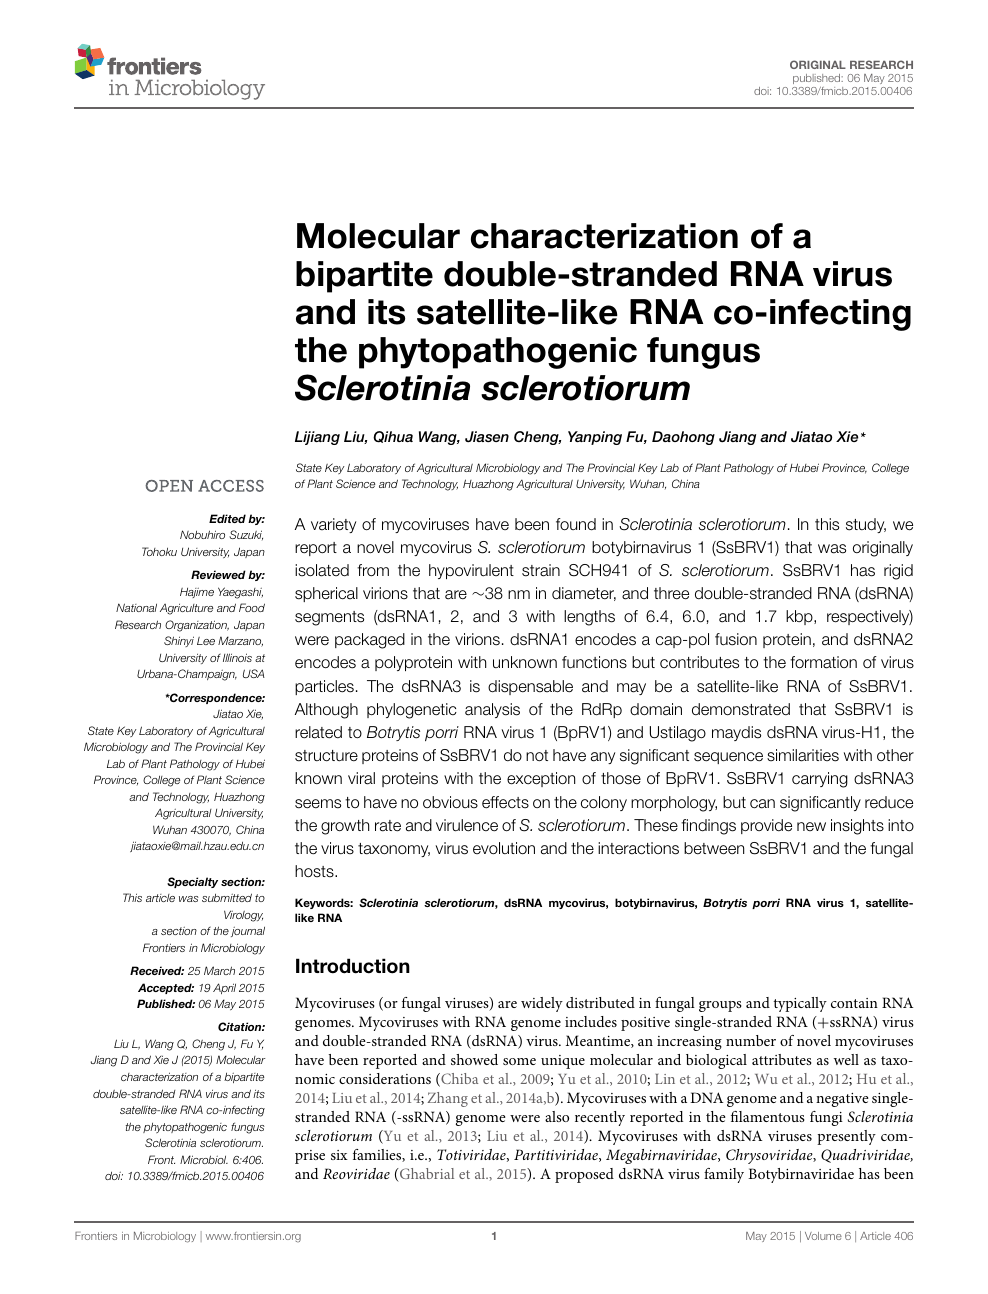 Molecular Characterization Of A Bipartite Double Stranded Rna Virus And Its Satellite Like Rna Co Infecting The Phytopathogenic Fungus Sclerotinia Sclerotiorum Topic Of Research Paper In Biological Sciences Download Scholarly Article Pdf And Read